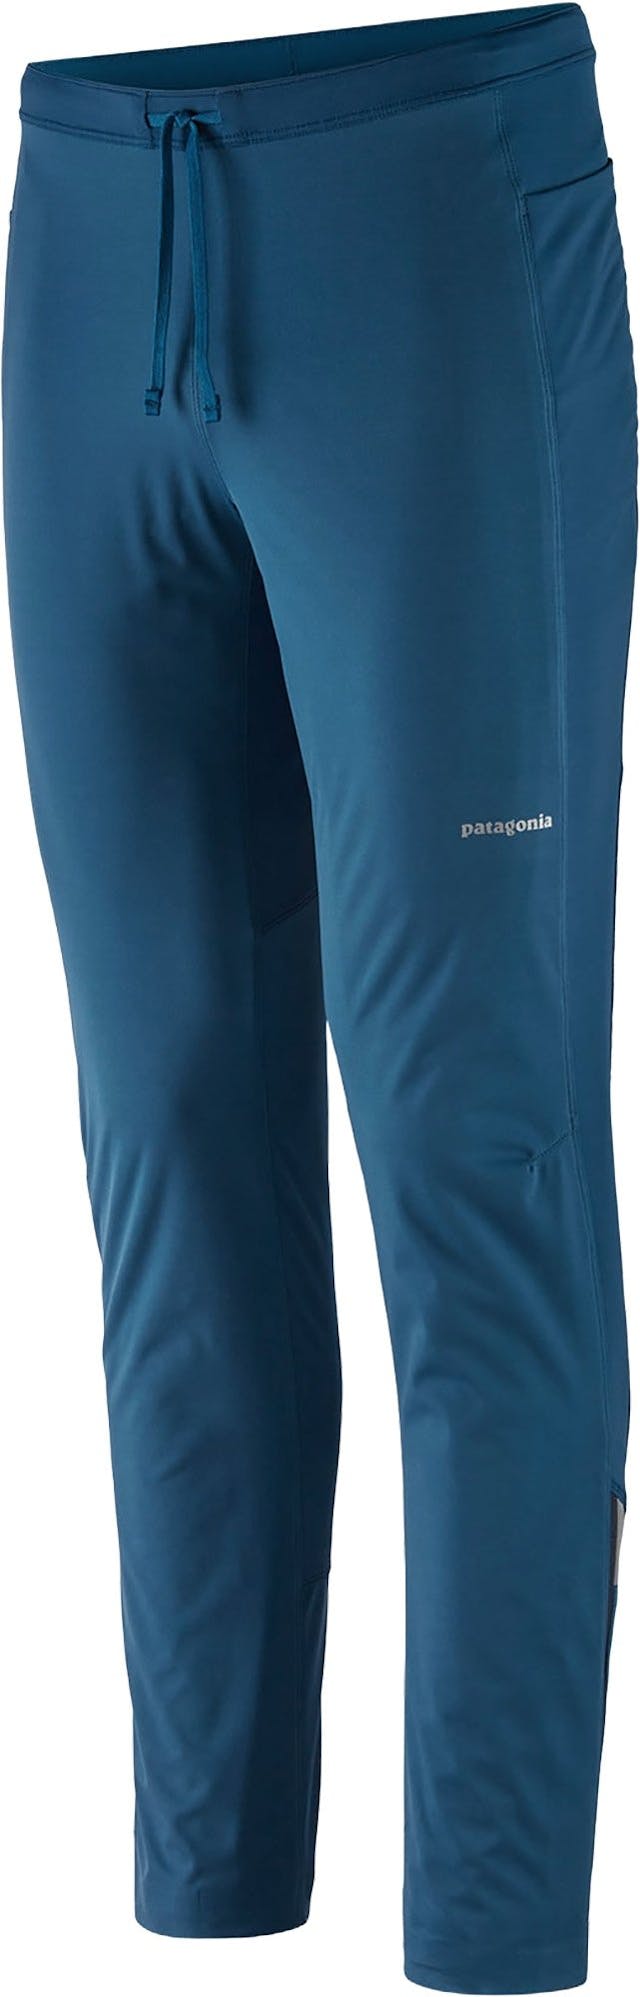 Product image for Wind Shield Pants - Men's